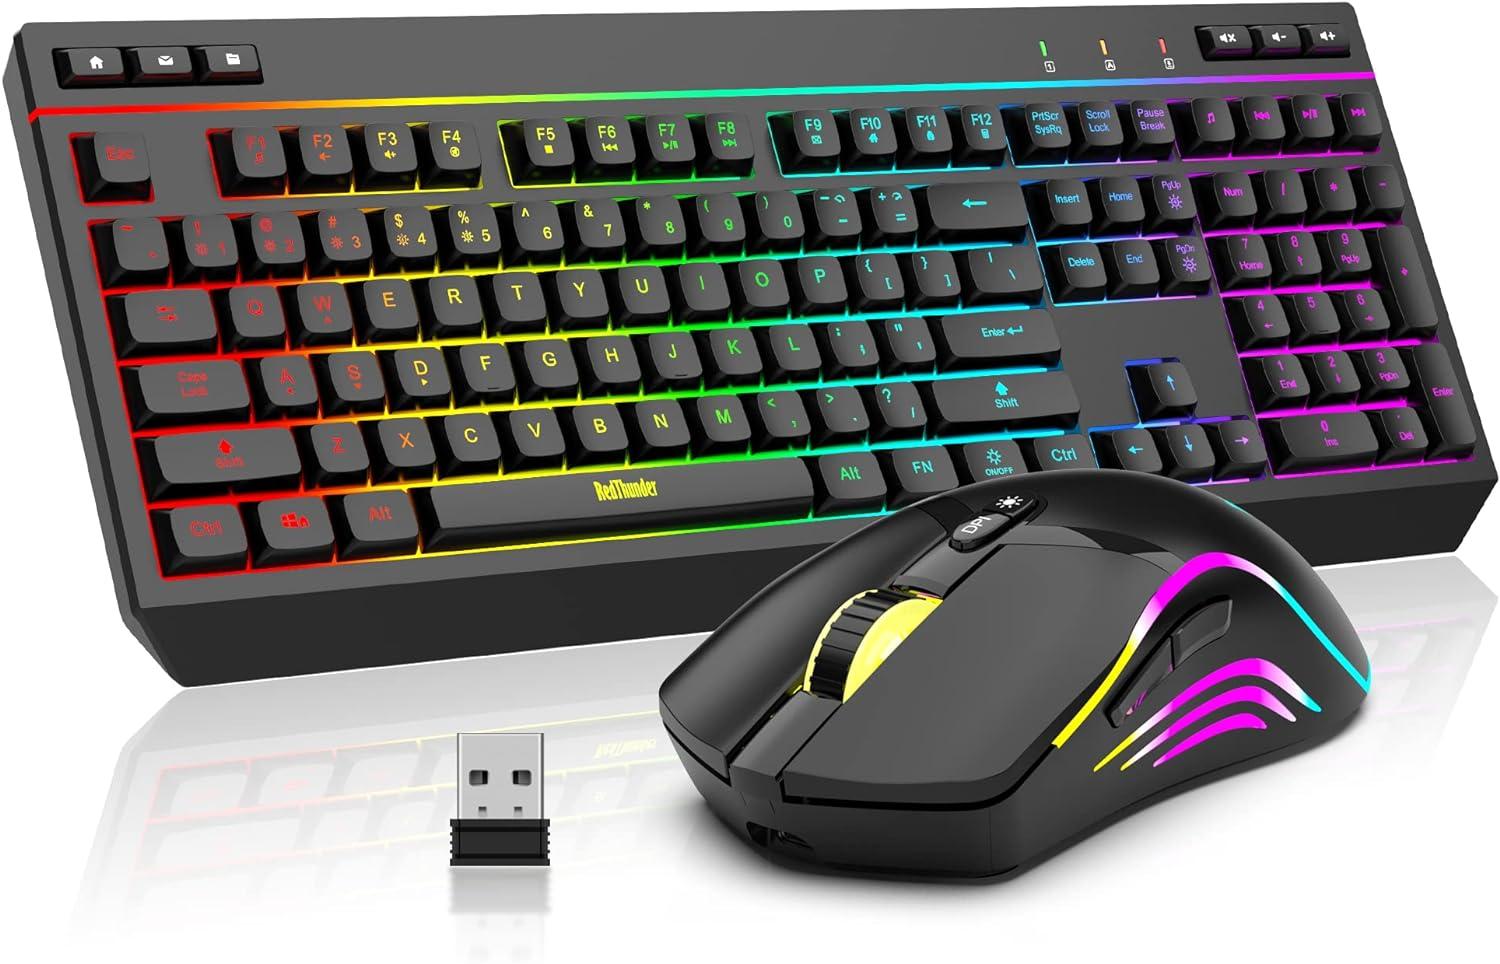 redthunder k20 wireless keyboard and mouse combo full size anti-ghosting keyboard with multimedia keys 